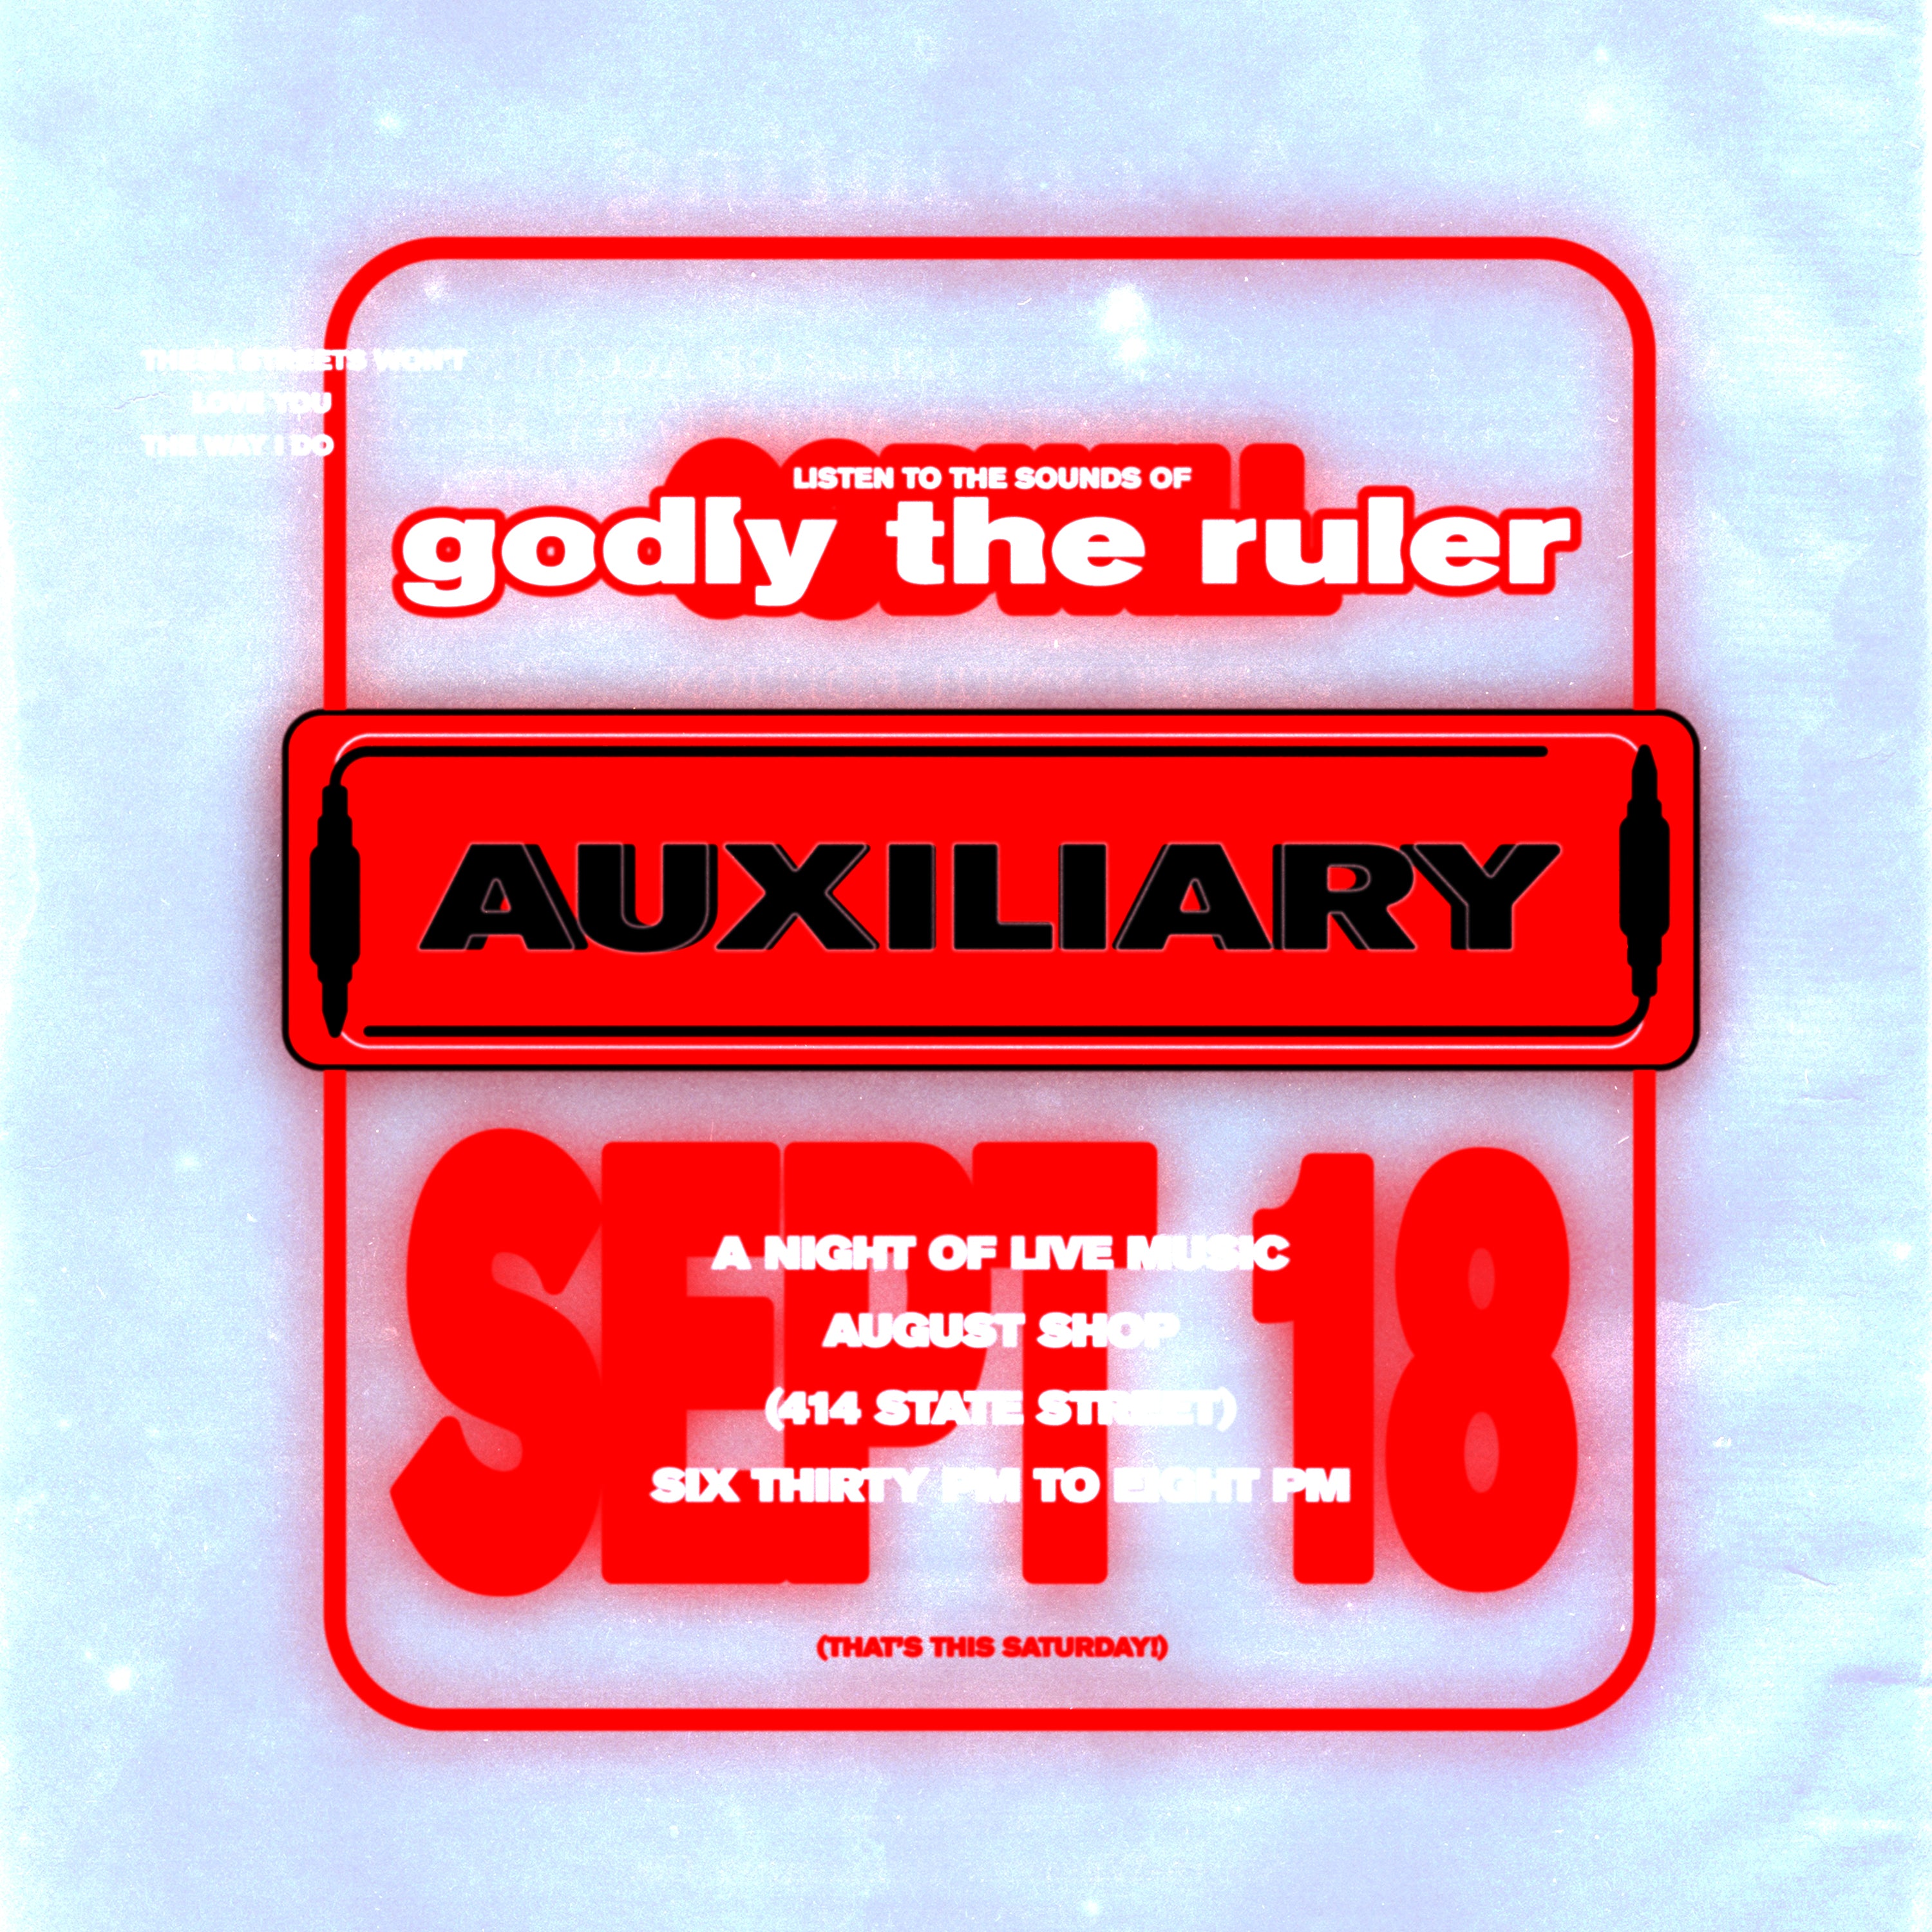 AUGUST AUX :: AUXILIARY 004 GODLY THE RULER